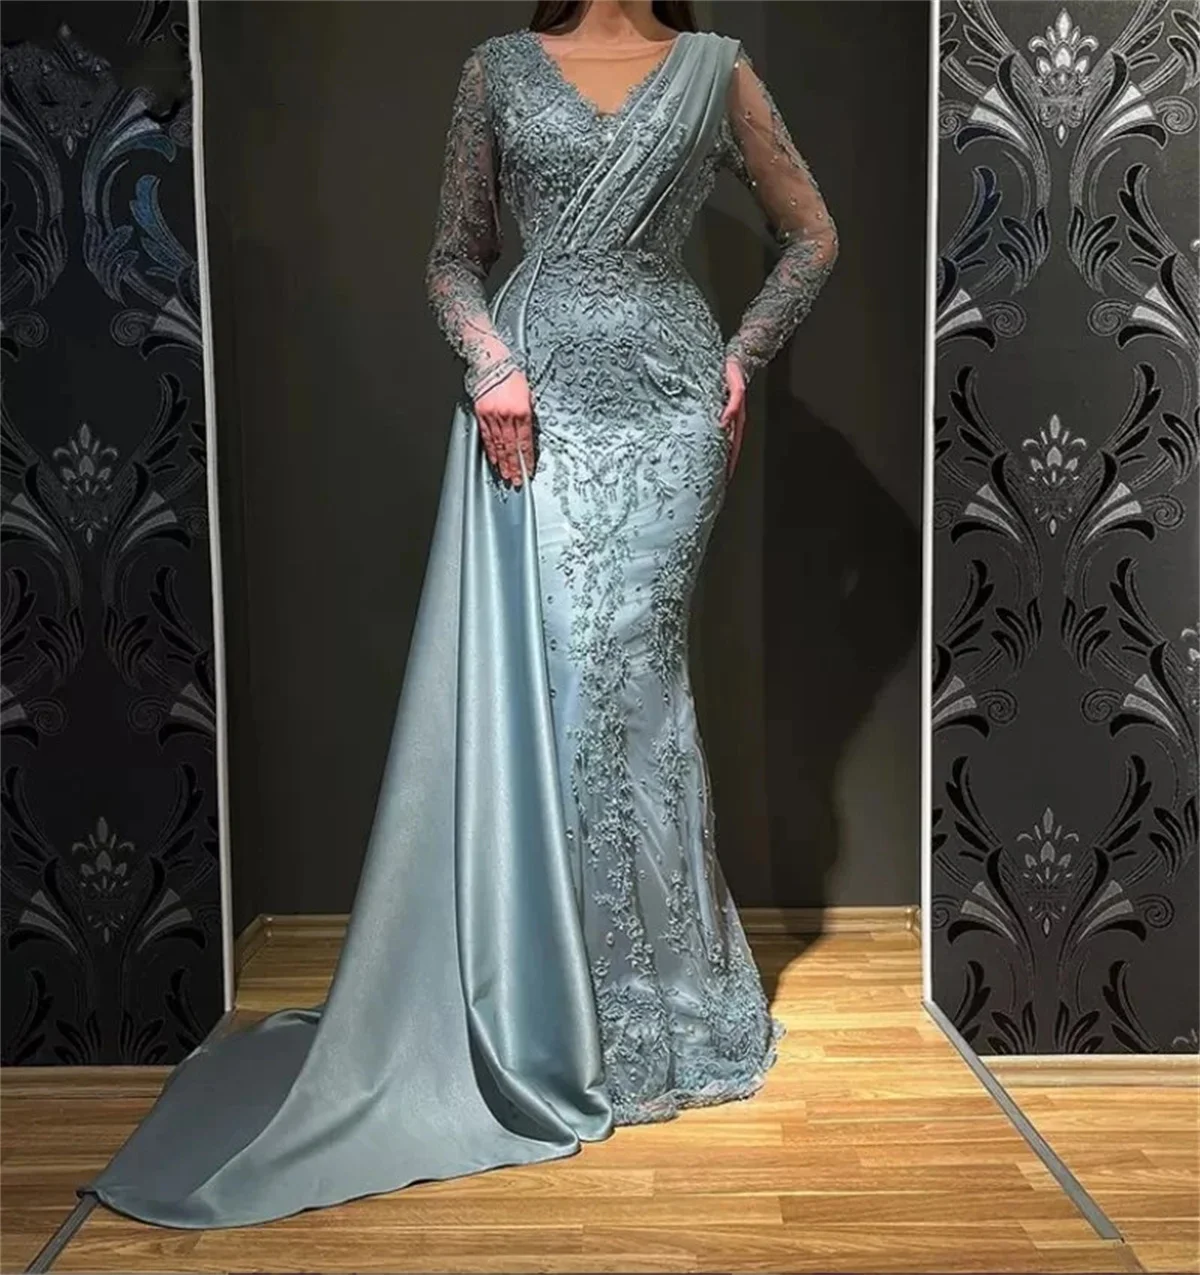 

Unique Arabic Evening Dresses Lace Mermaid Long Sleeves Side Train Beads Gorgeous Formal Prom Gowns Met Gala Night Party Robe